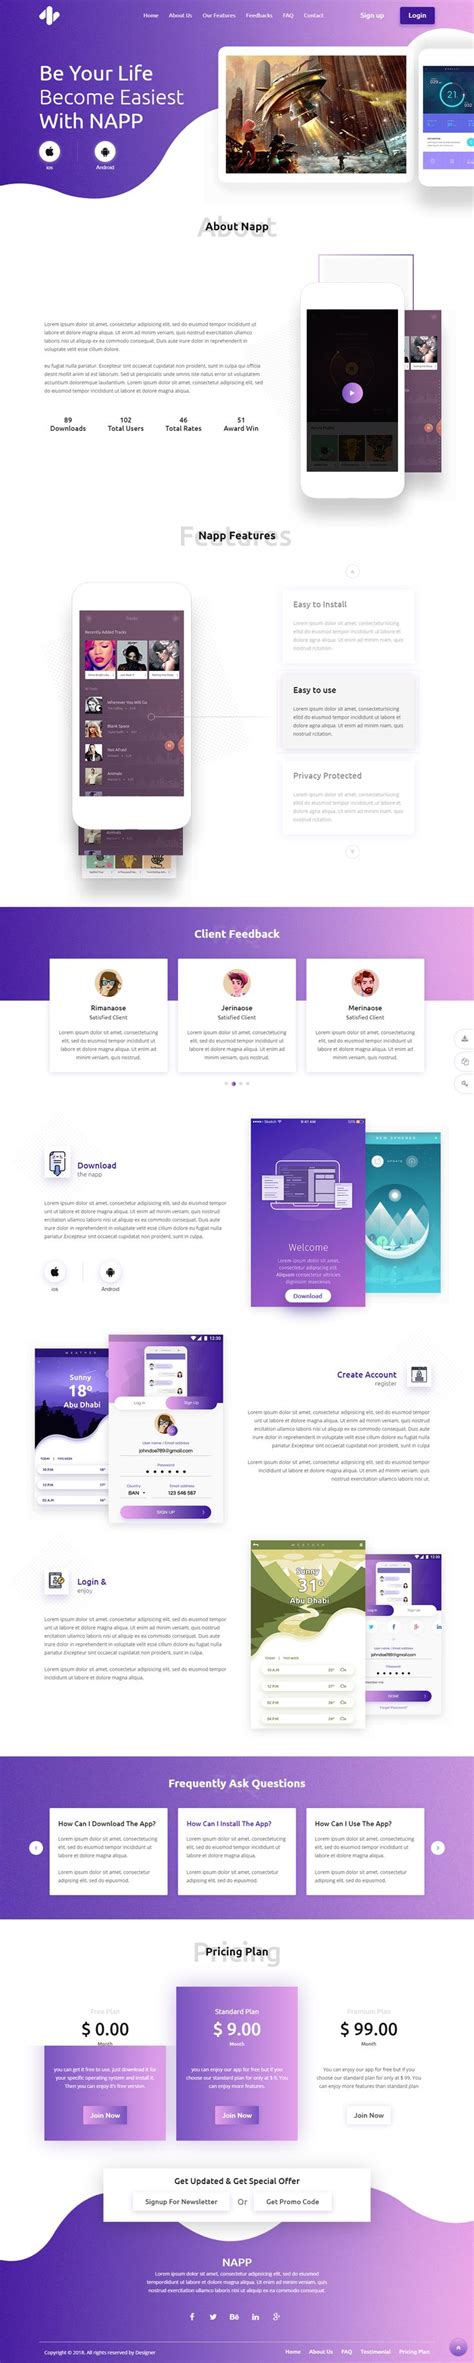 Bootstrap Landing Page